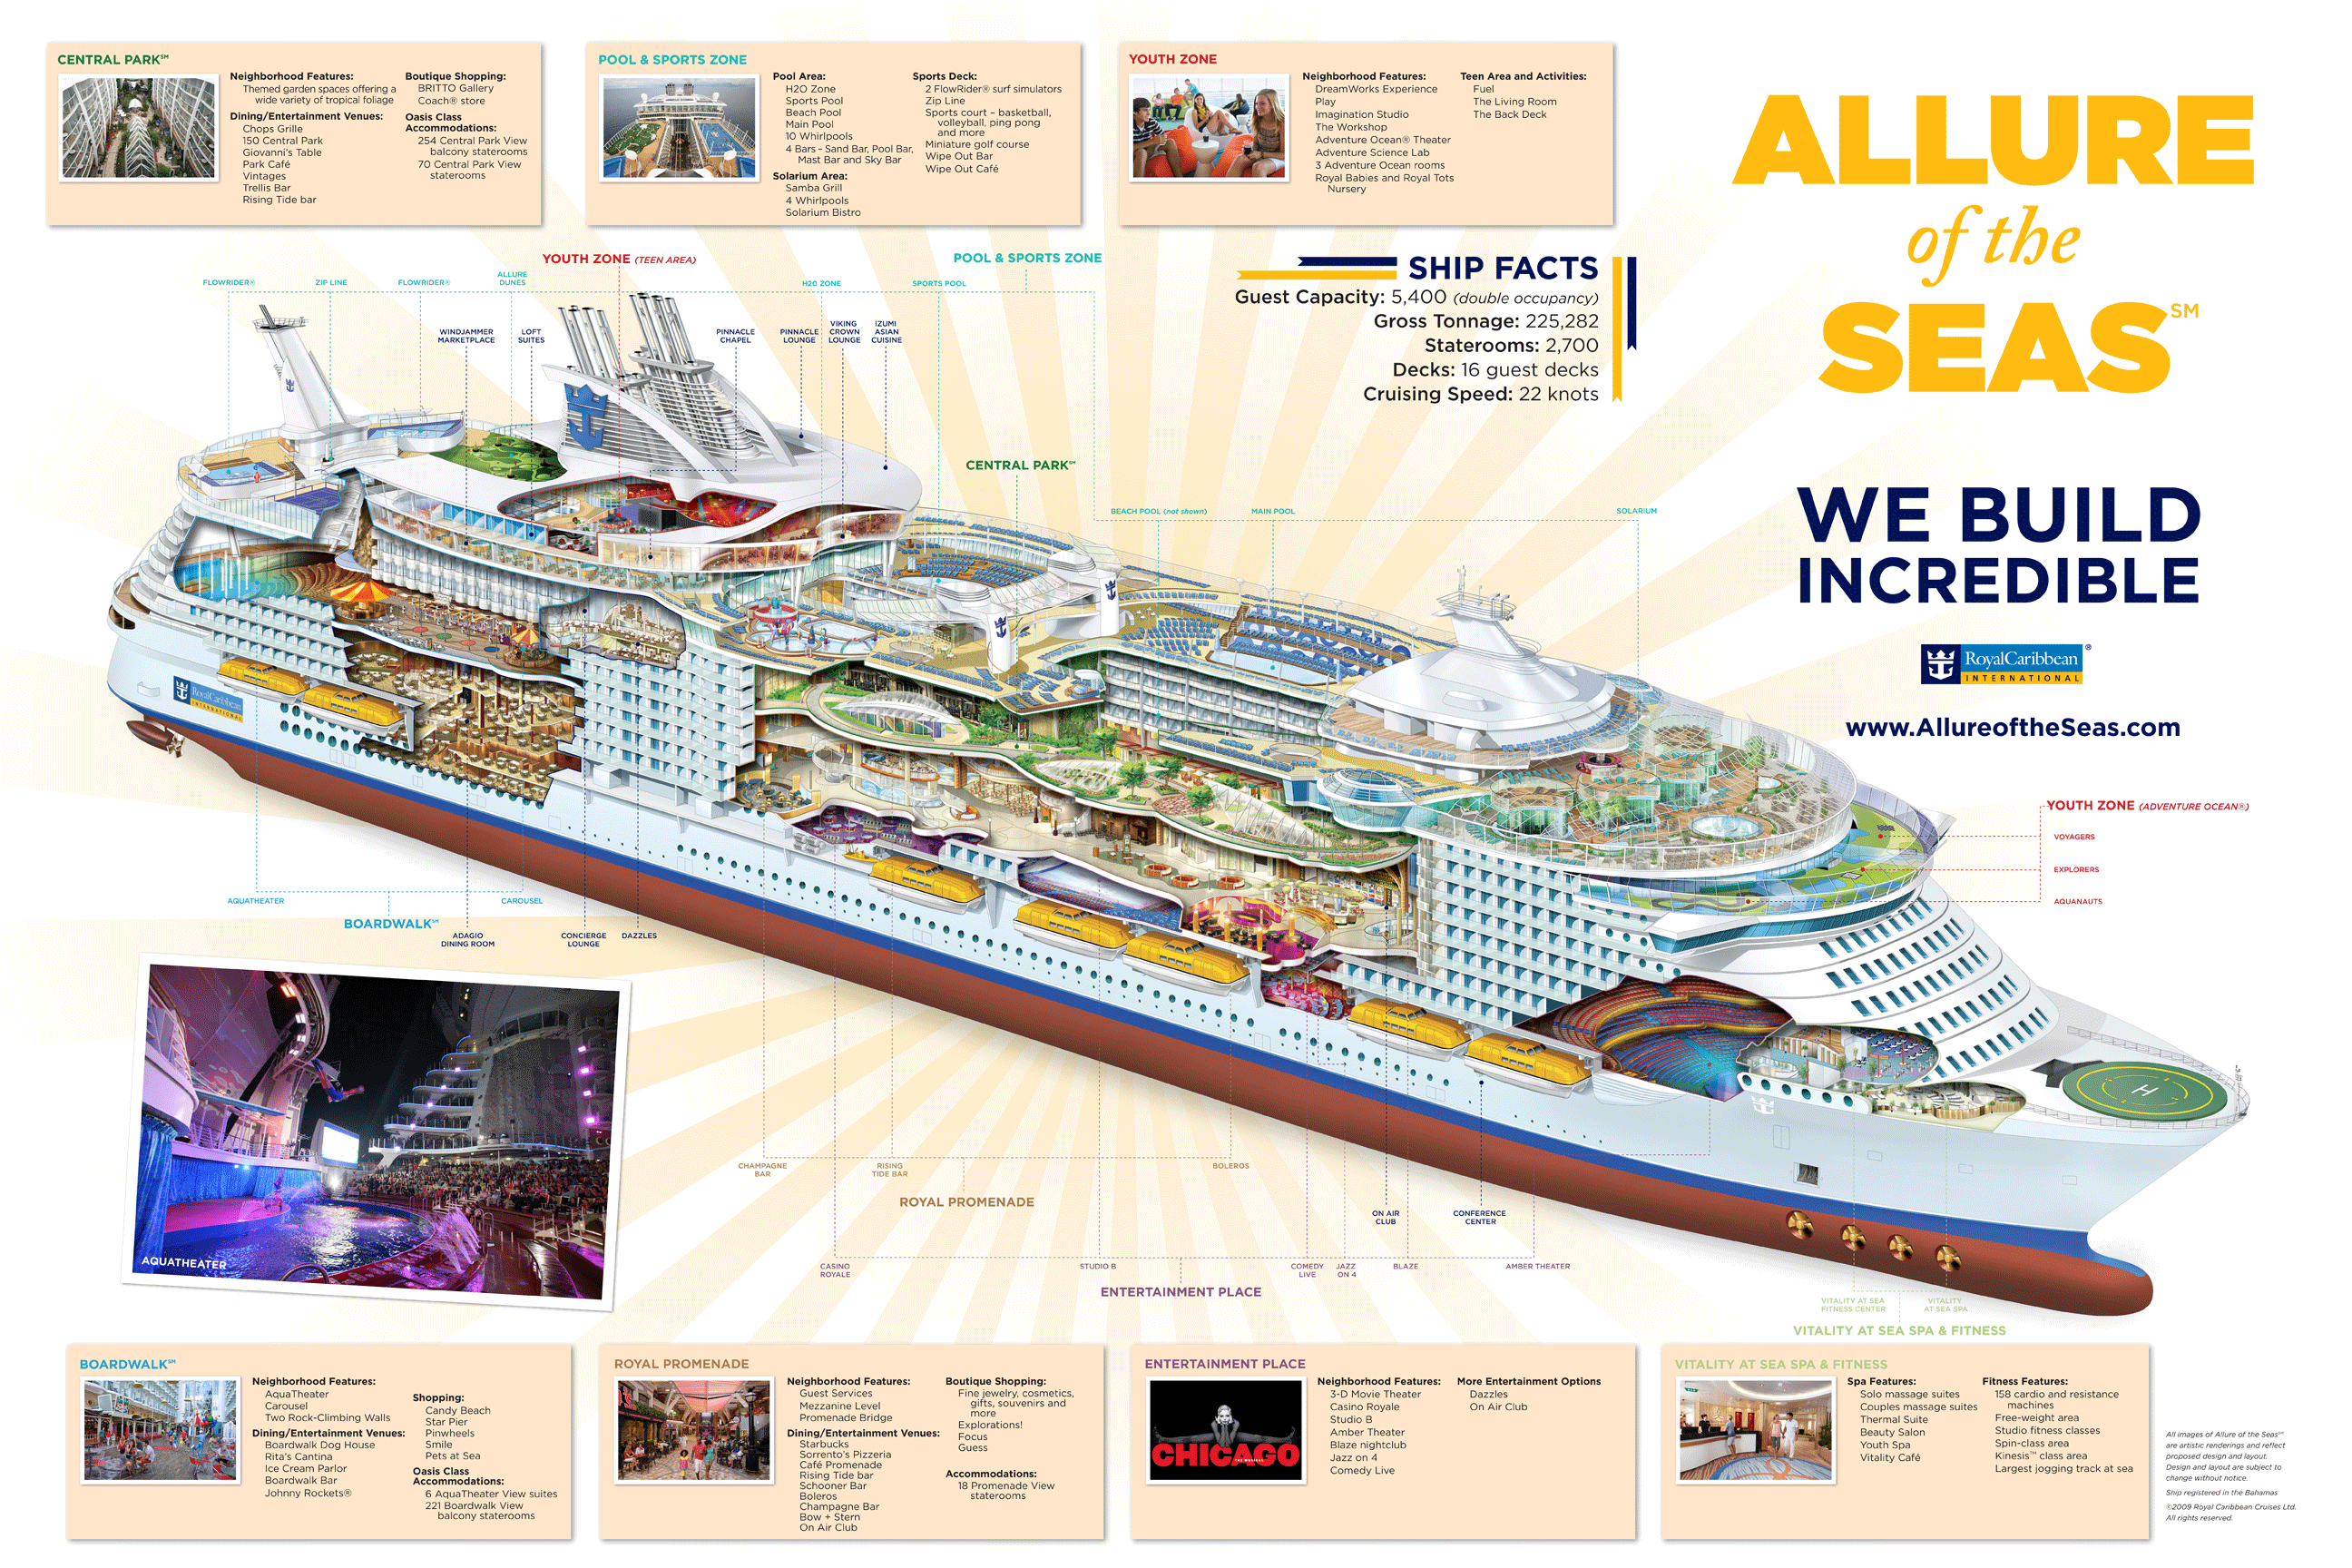 Allure Of The Seas Inside / The World's Largest Cruise Ship Allure Of